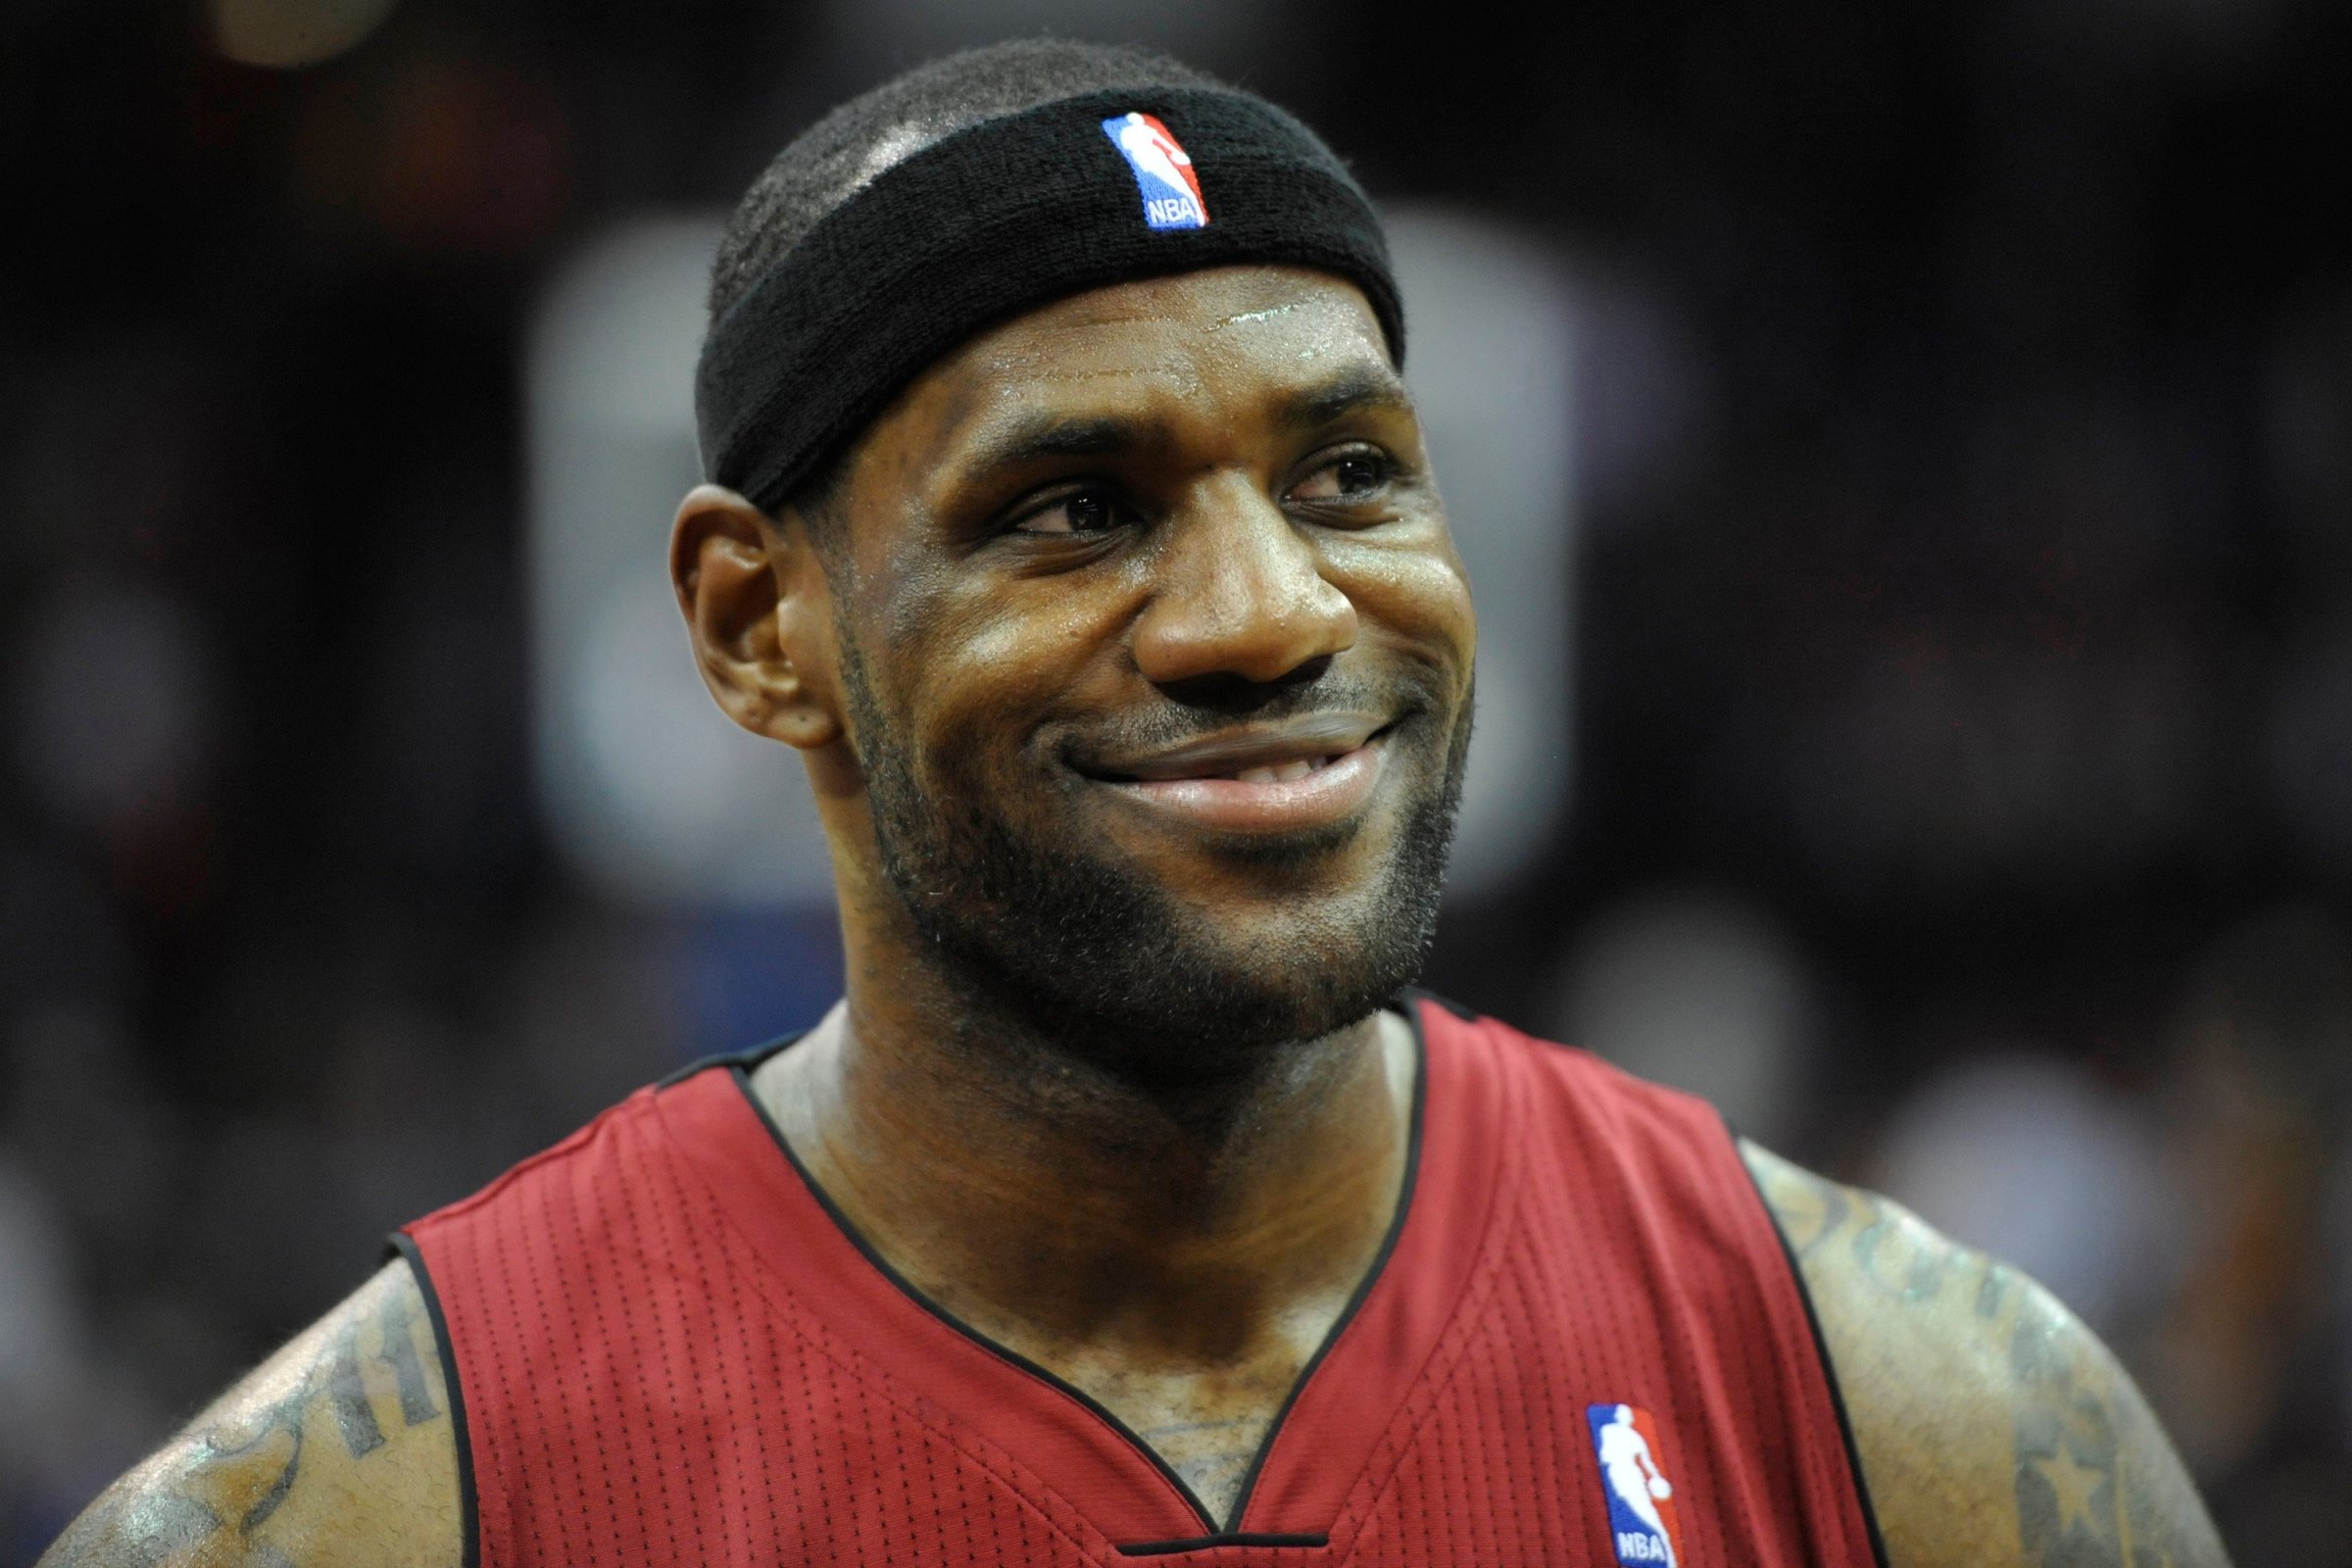 Miami Heat forward LeBron James smiles after a 100-96 win over the Cleveland Cavaliers at Quicken Loans Arena